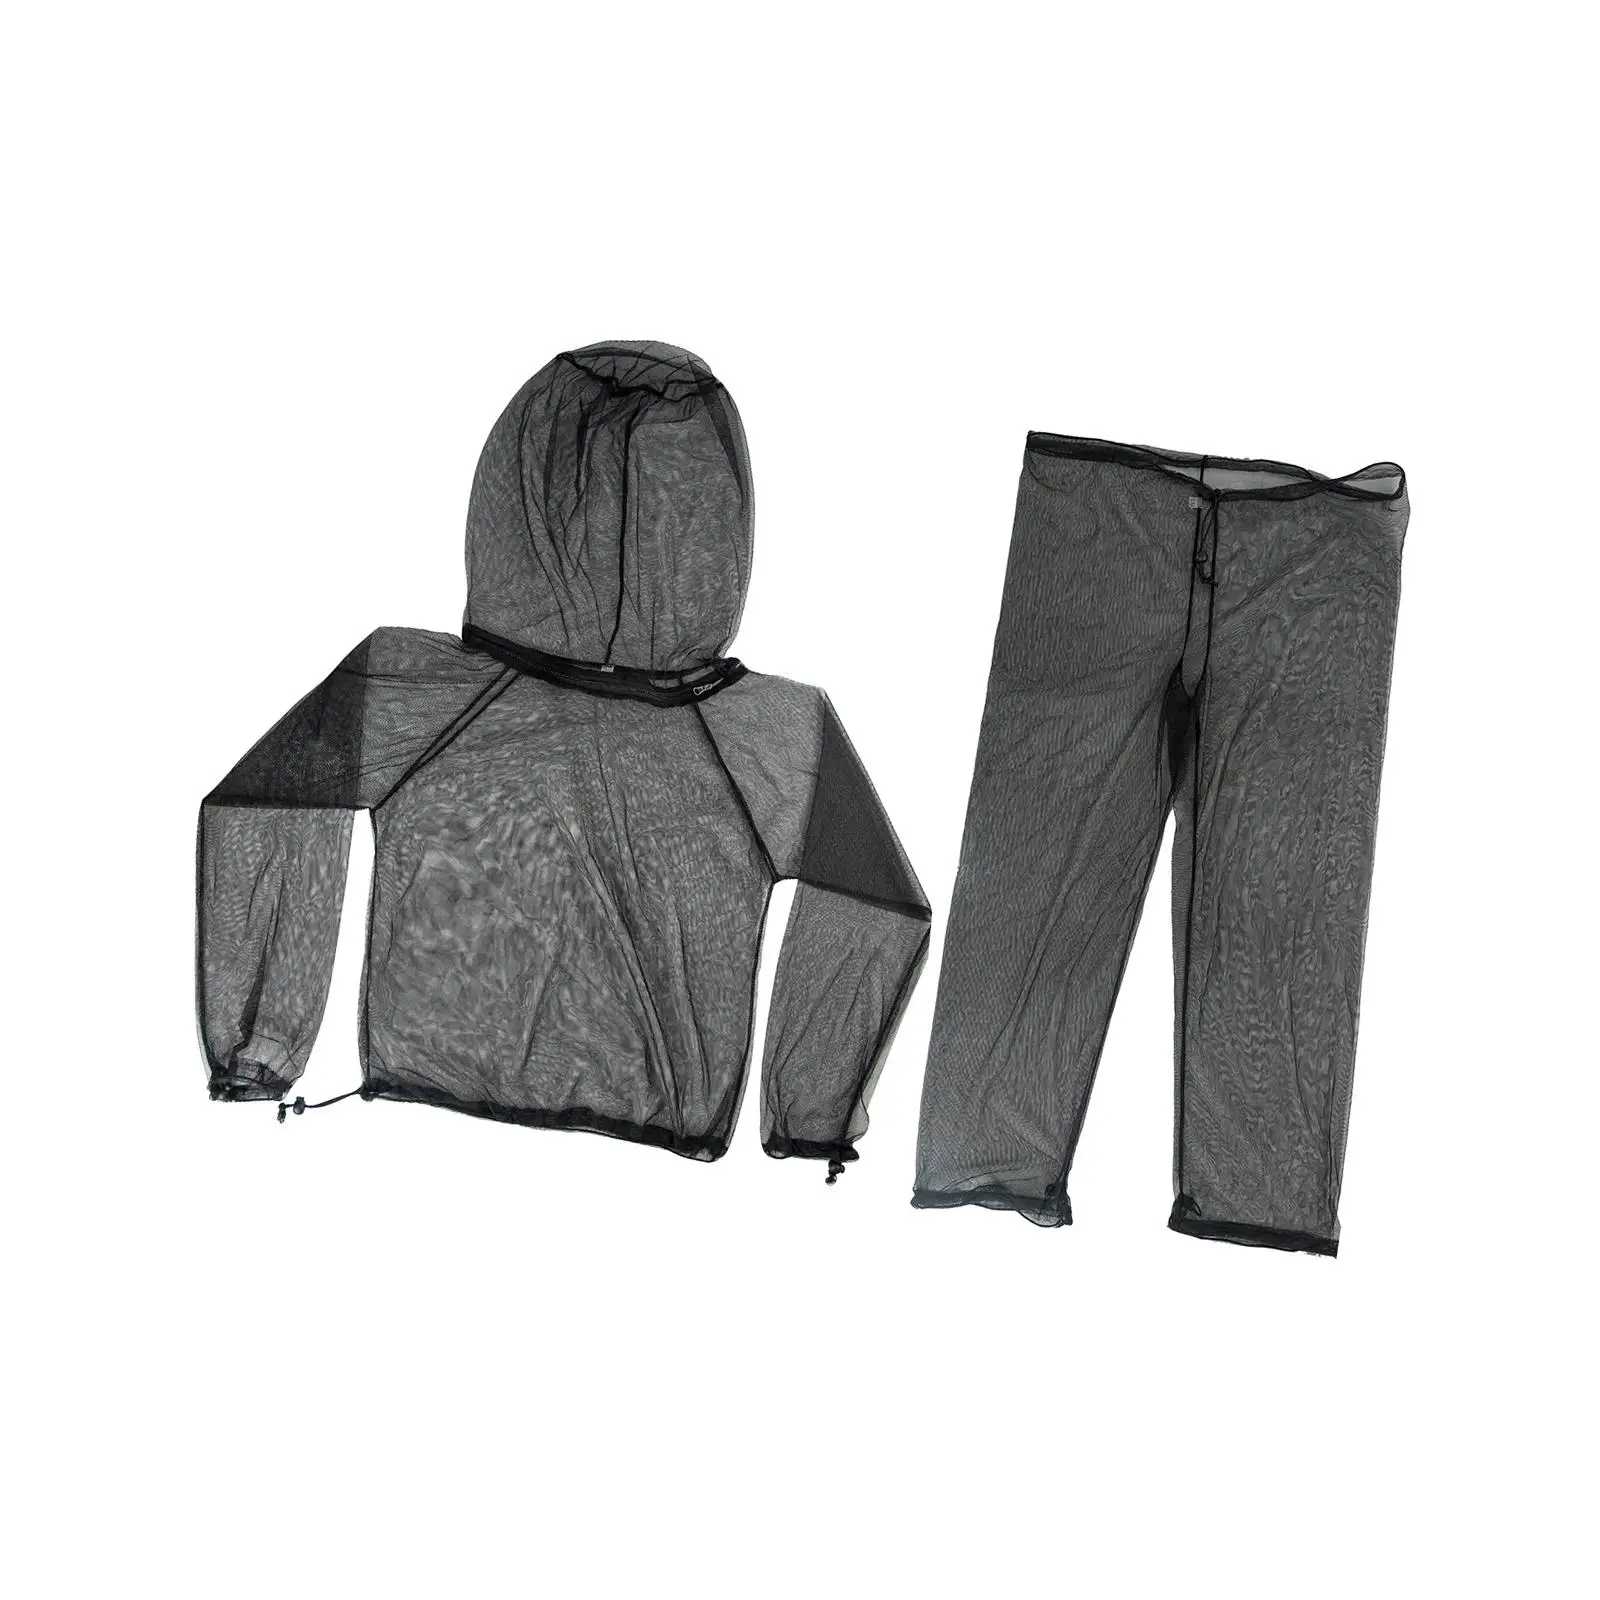 Net Suit Breathable Mesh Hooded suits for Outdoor Gardening Fishing